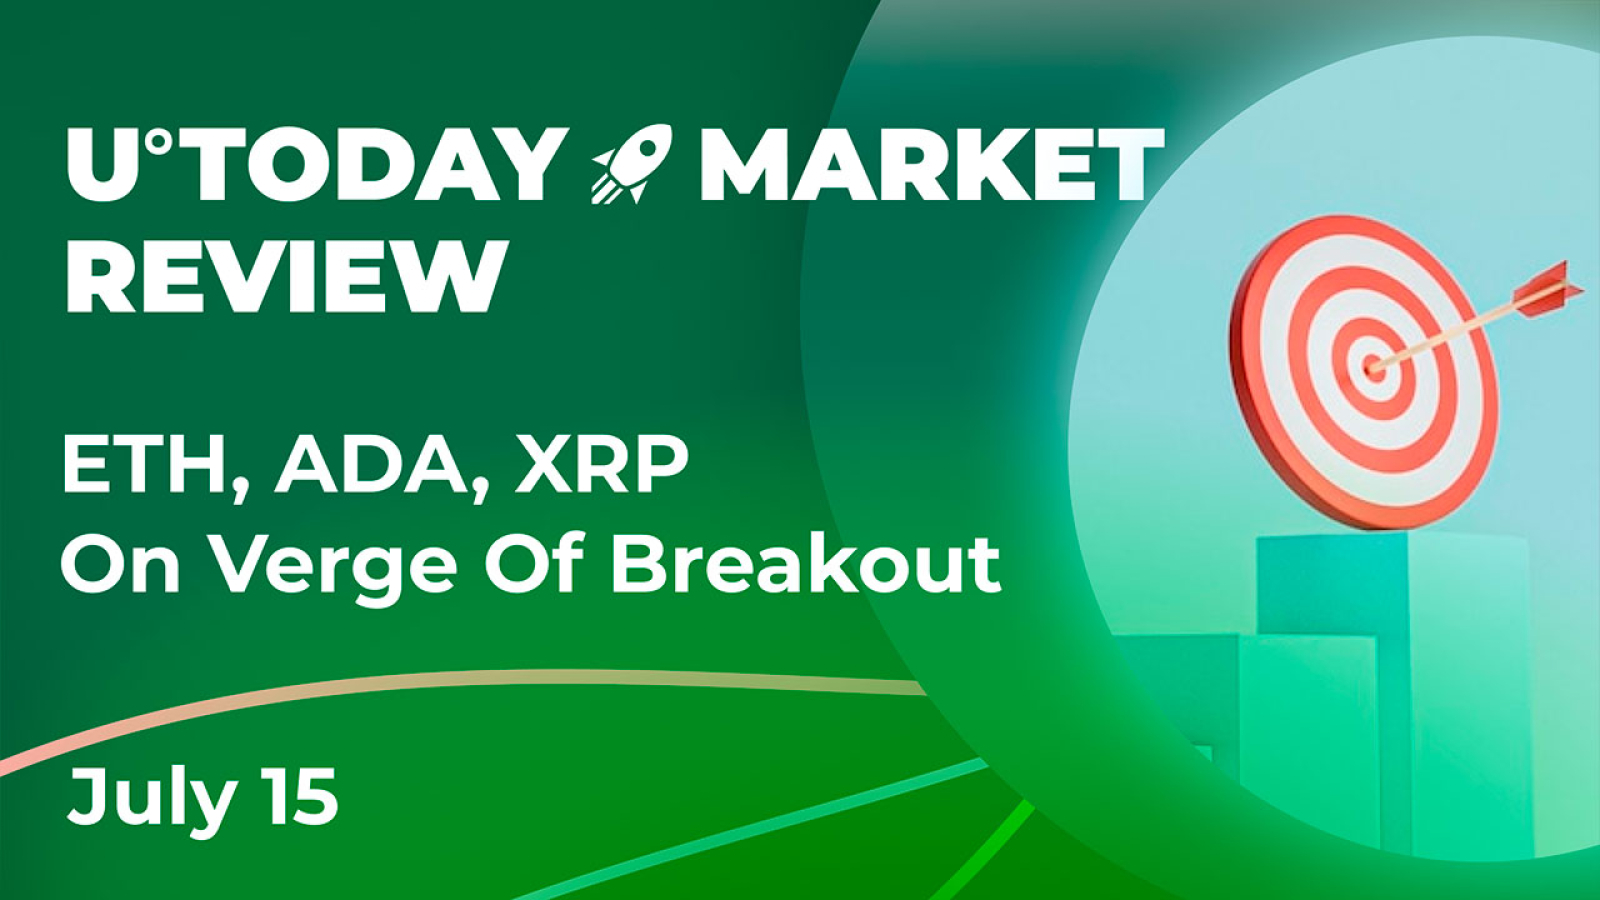 ETH, ADA, XRP on Verge of Breakout After Reaching Essential Resistance Level: Crypto Market Review, July 15